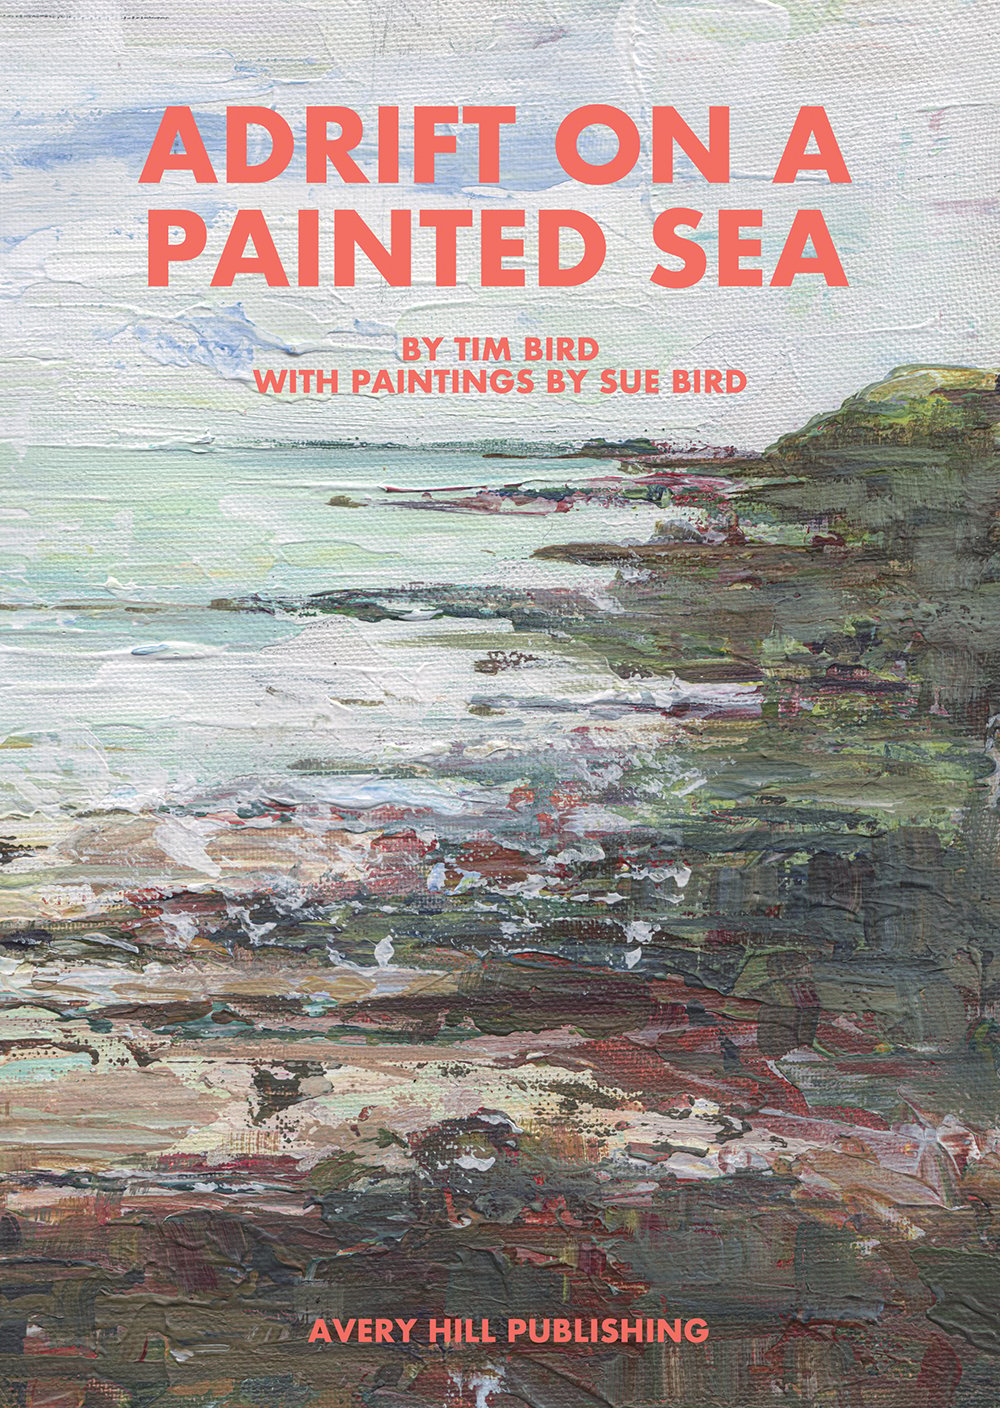 Adrift on a Painted Sea by Tim Bird - preorder